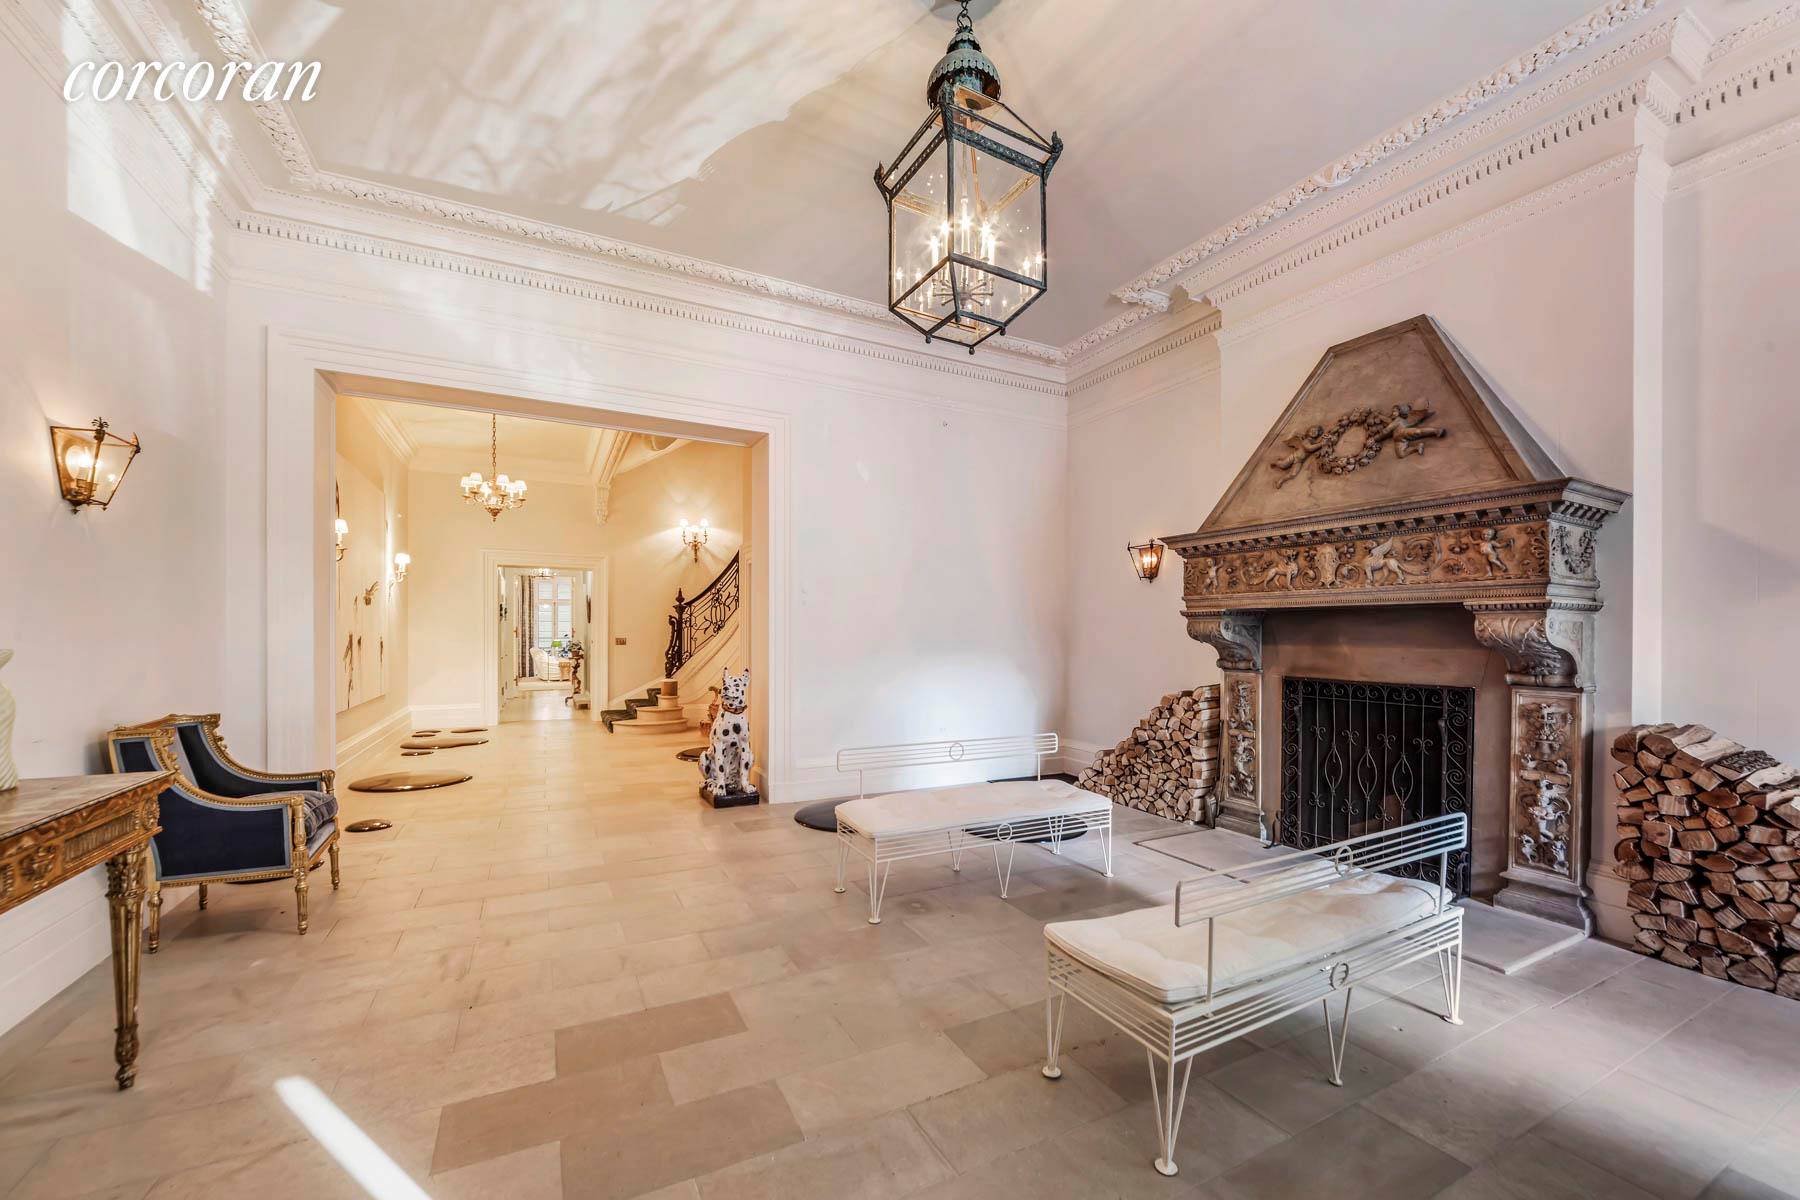 973 Fifth Avenue is one of the most notable residences remaining in private hands today.